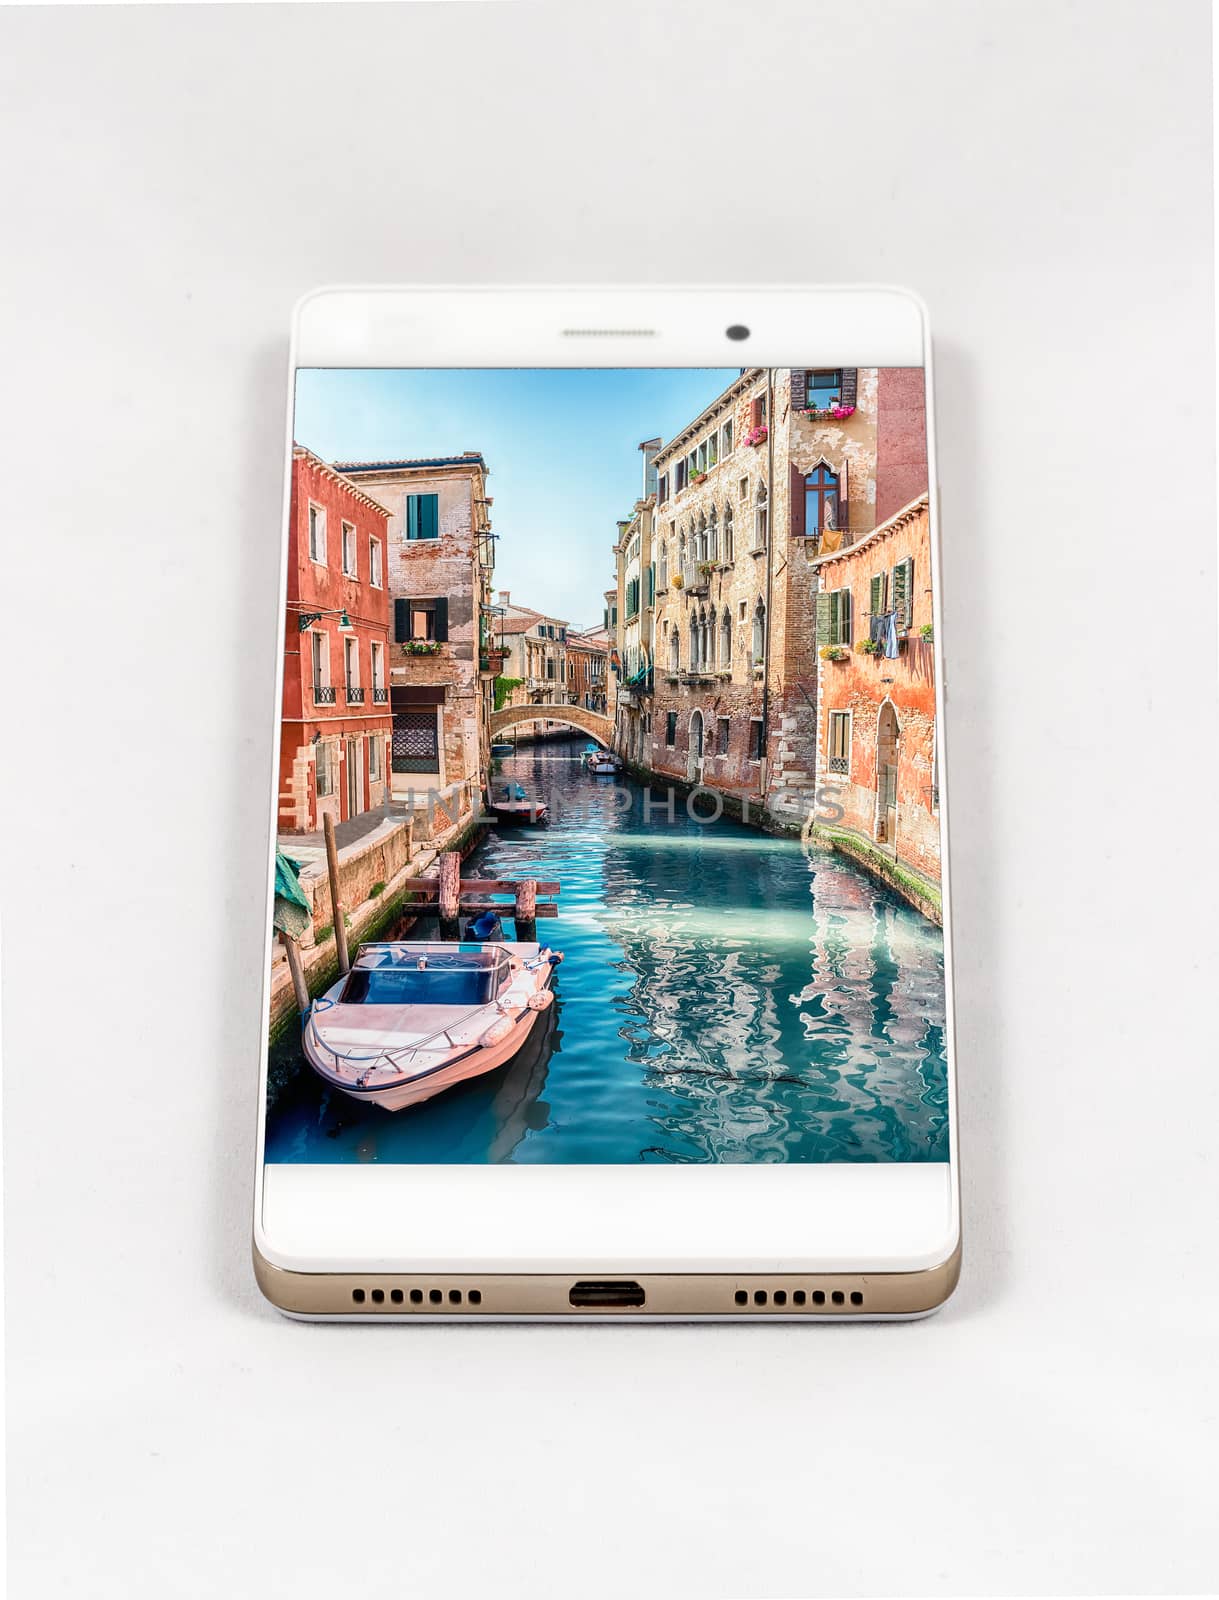 Modern smartphone with full screen picture of Venice, Italy. Concept for travel smartphone photography. All images in this composition are made by me and separately available on my portfolio